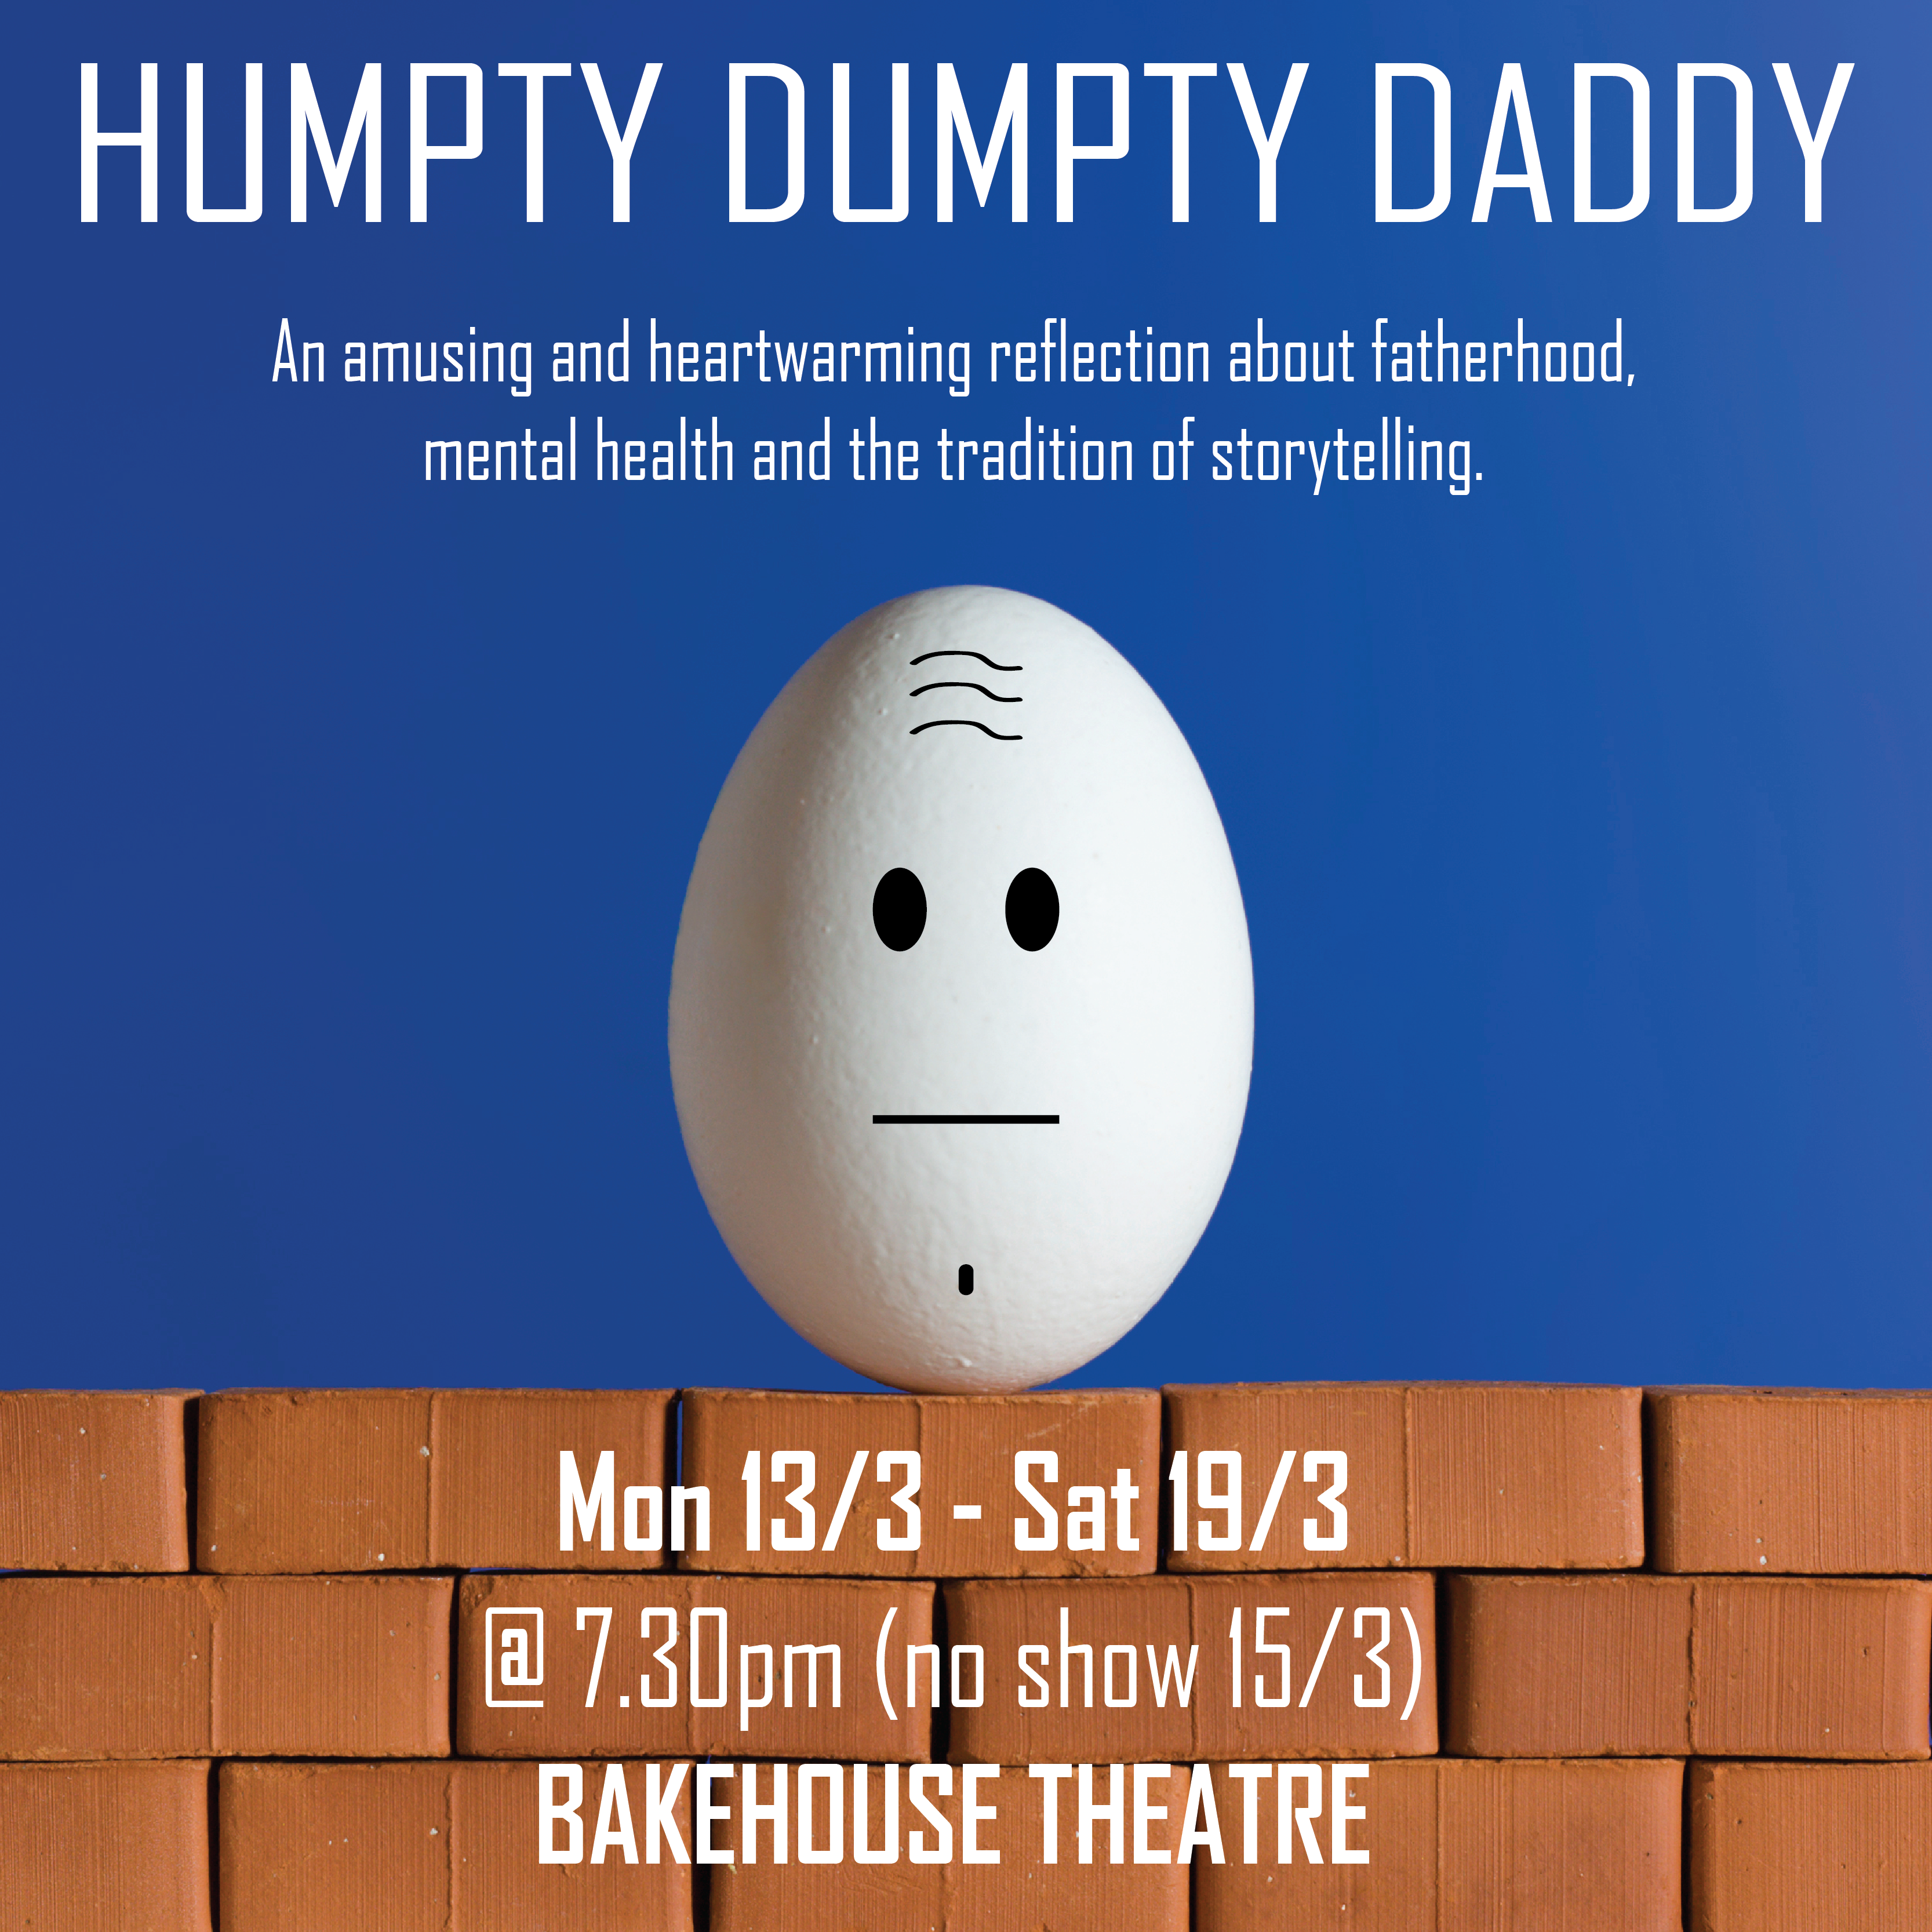 Announcement: Humpty Dumpty Daddy will be at Adelaide Fringe!